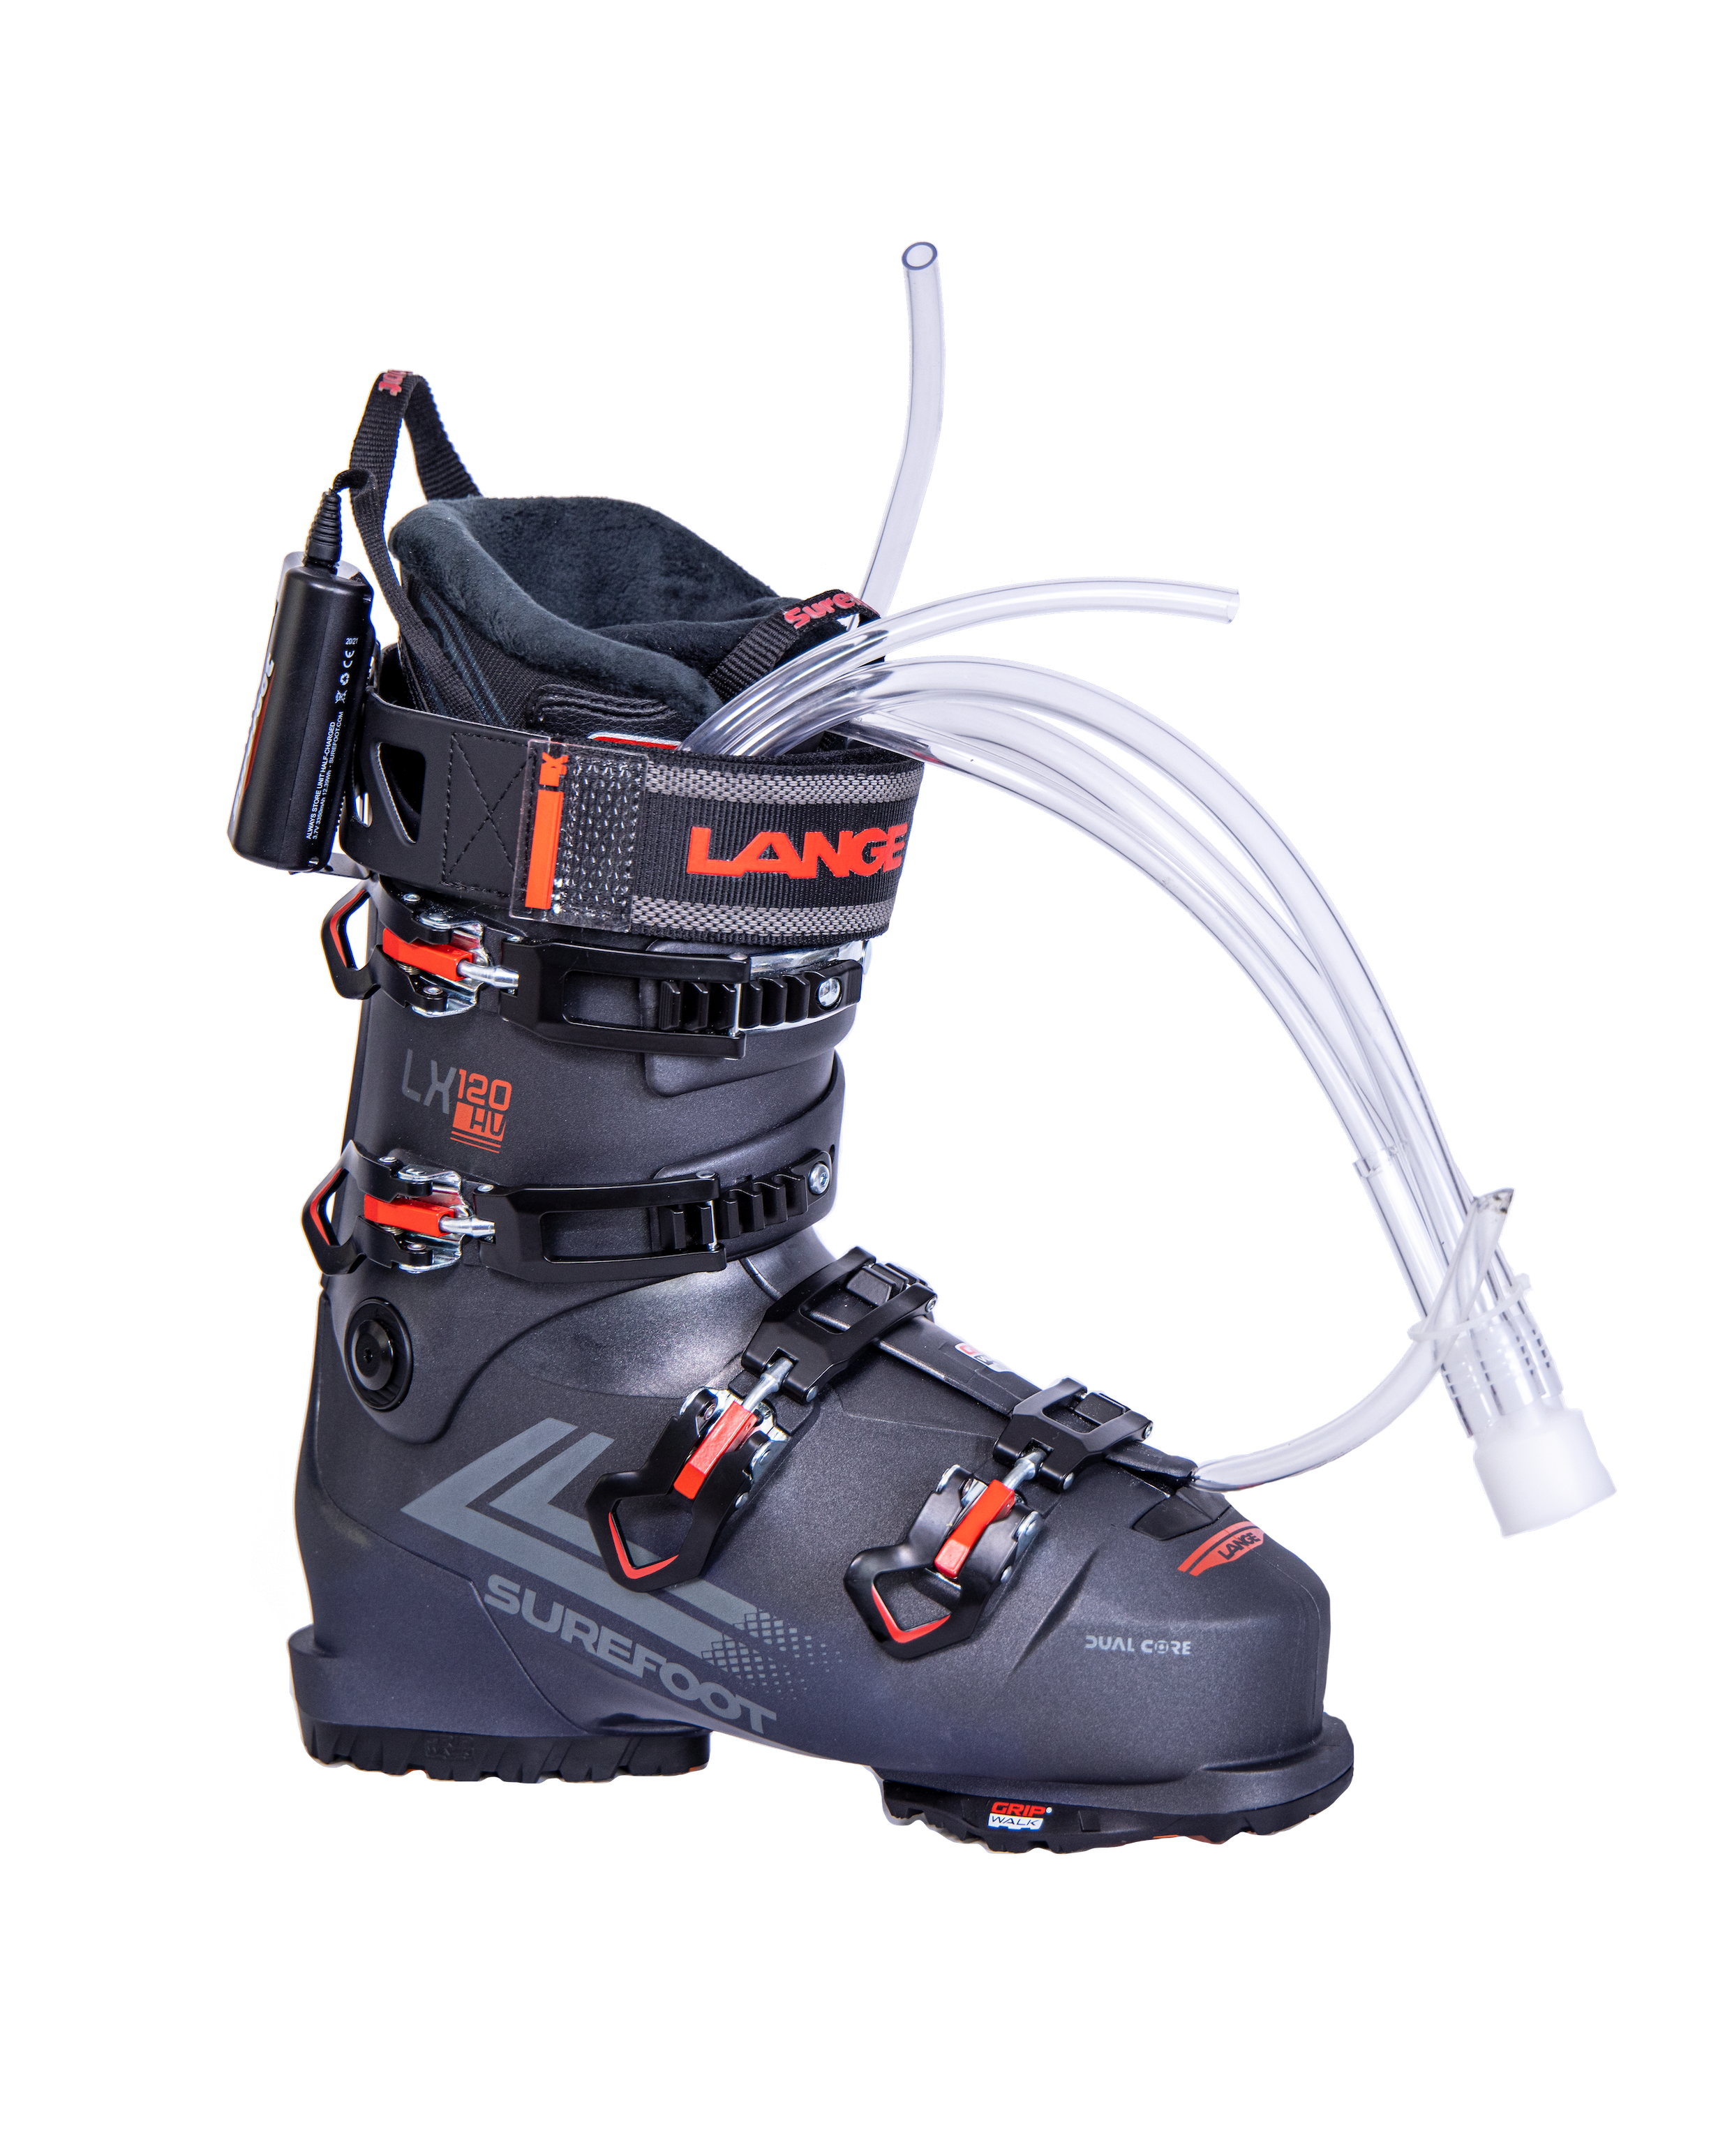 Surefoot Lange LX 120 HV black ski boot shell with red accents on buckles and Lange logo in red on power strap. Plastic tubes coming out for Surefoot memory foam injection into shell lining. Winterheat ski boot heater attached to outside edge.